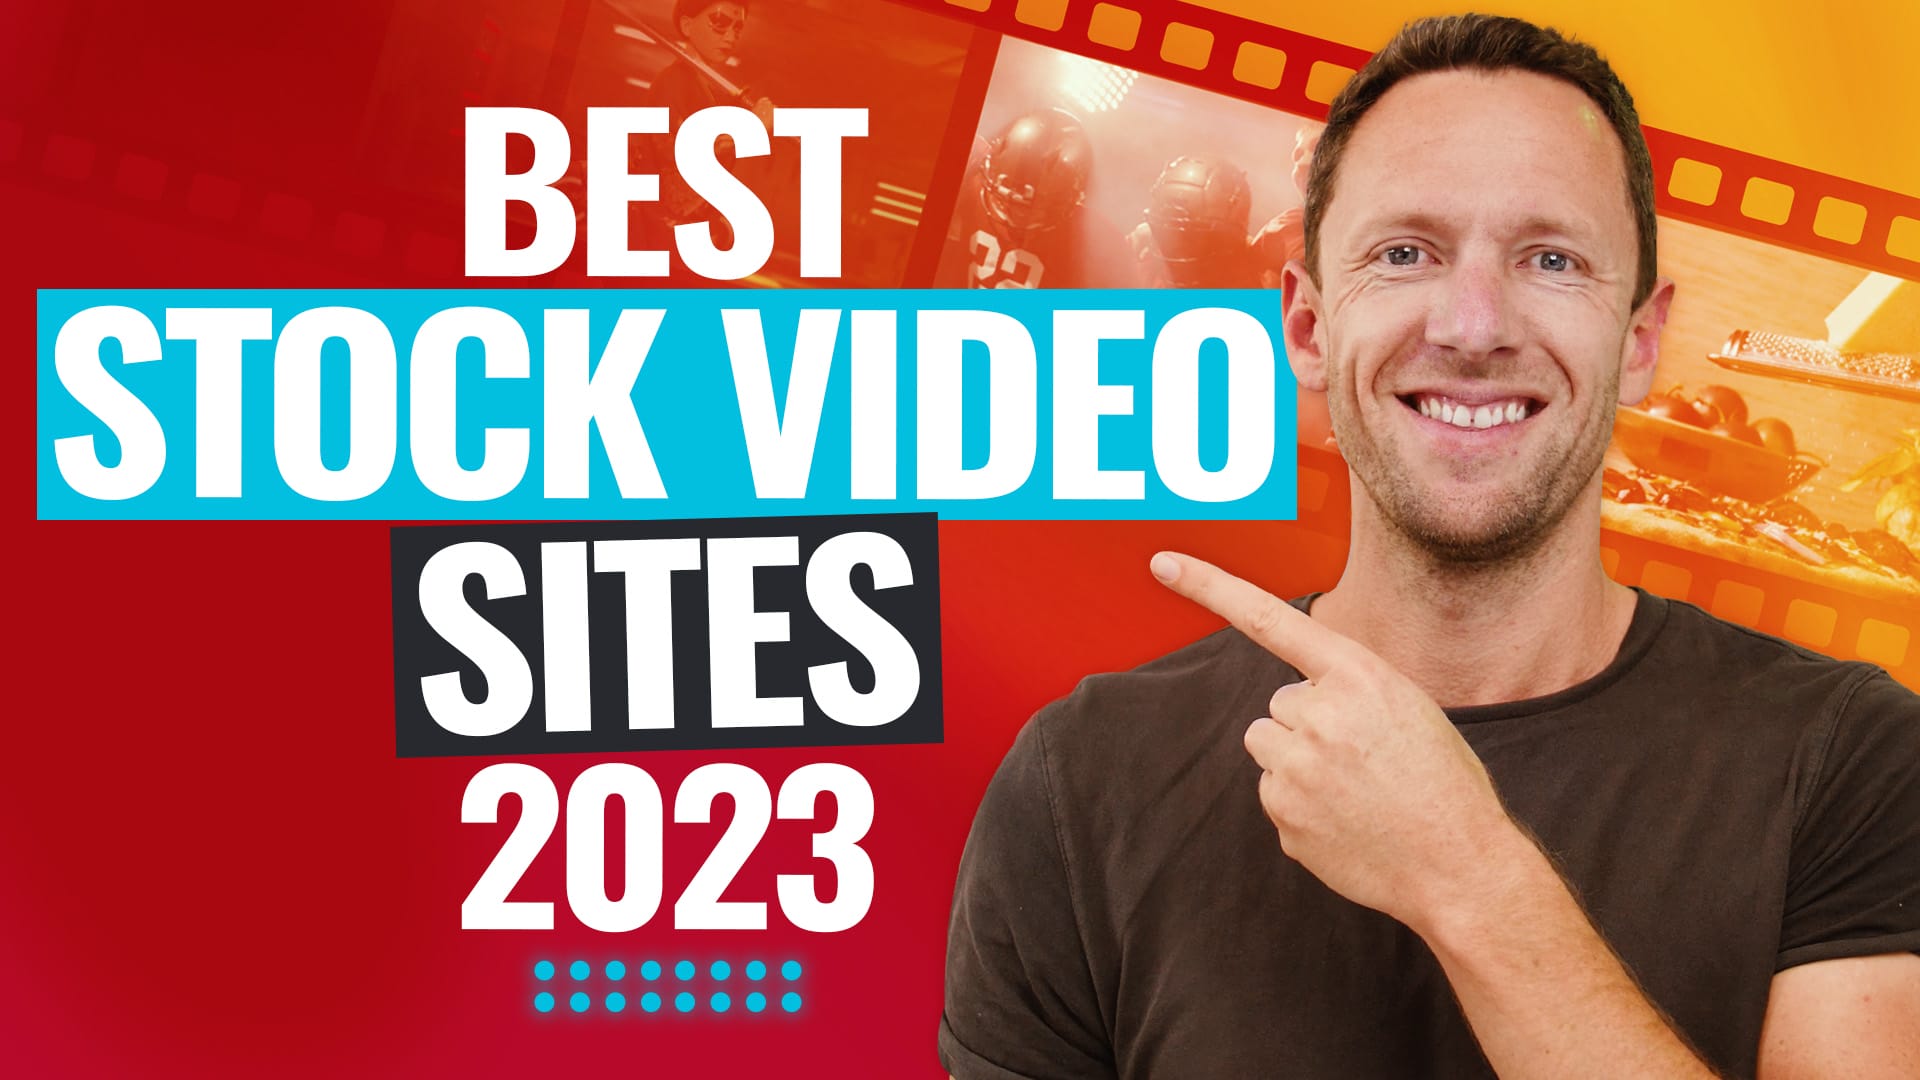 Best STOCK VIDEO Sites For Royalty Free Video 2023 Review!